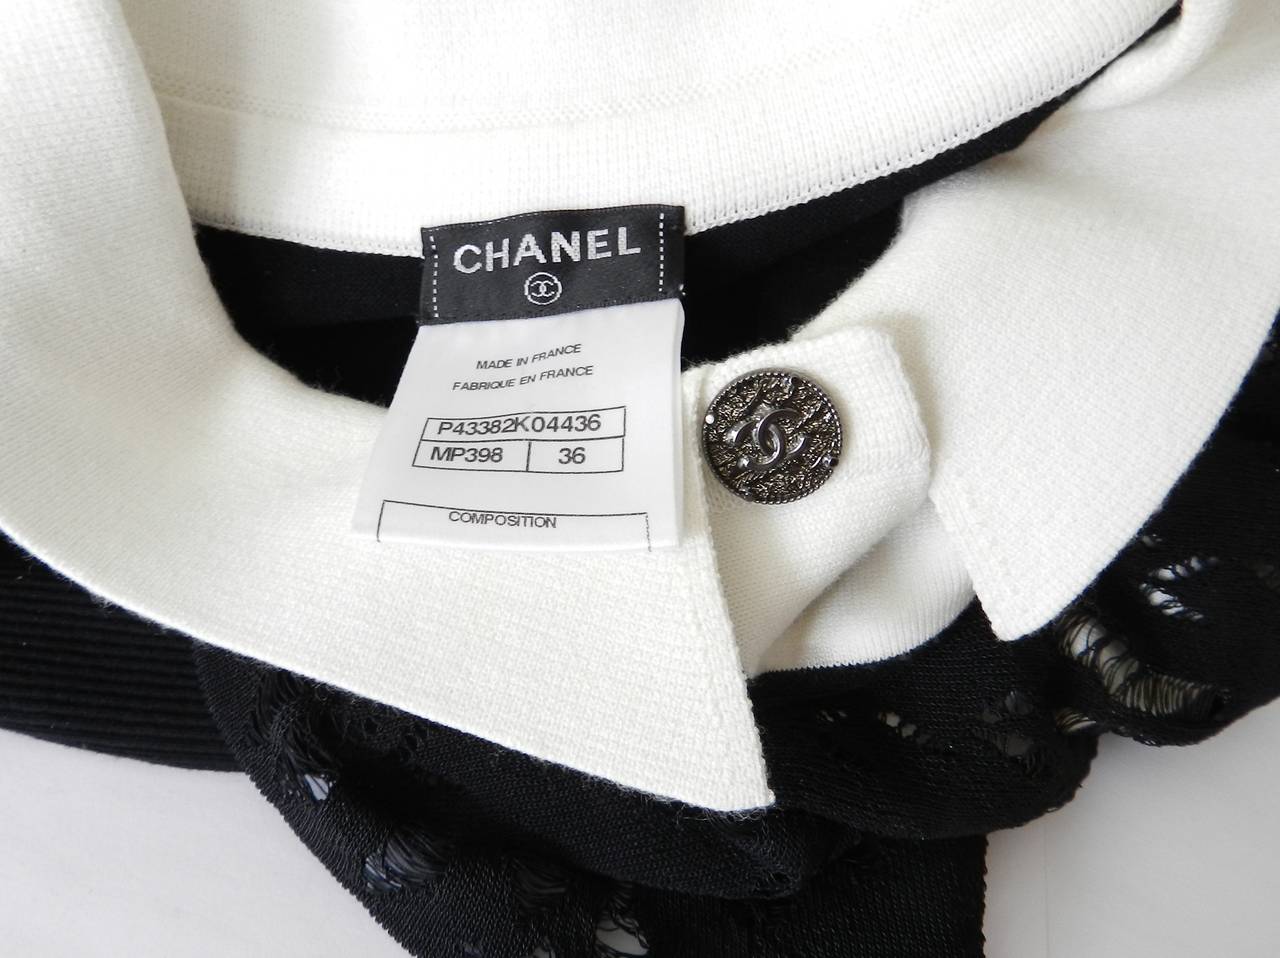 Women's Chanel Black White Polo Dress with Lace Overlay